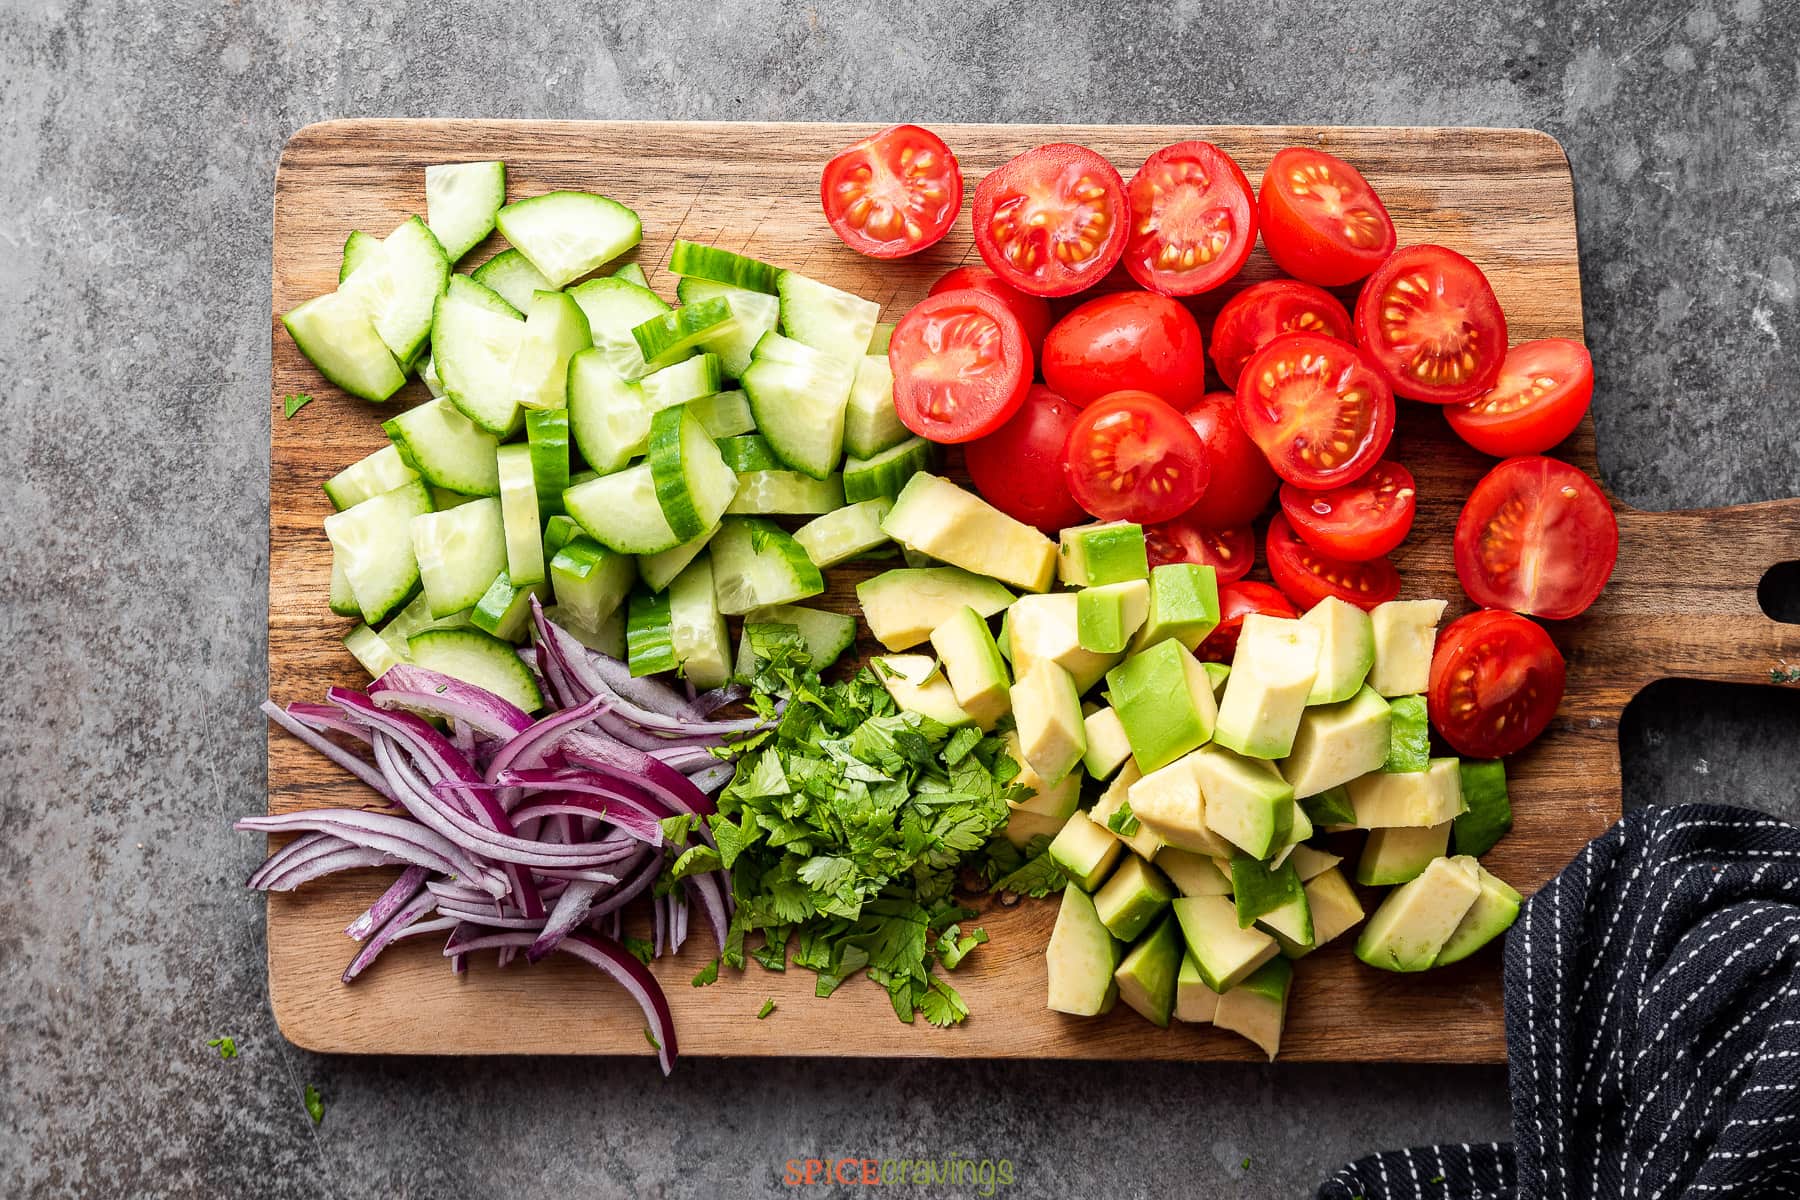 Chopped cucumber, tomato, avocado and more on wooden cutting board